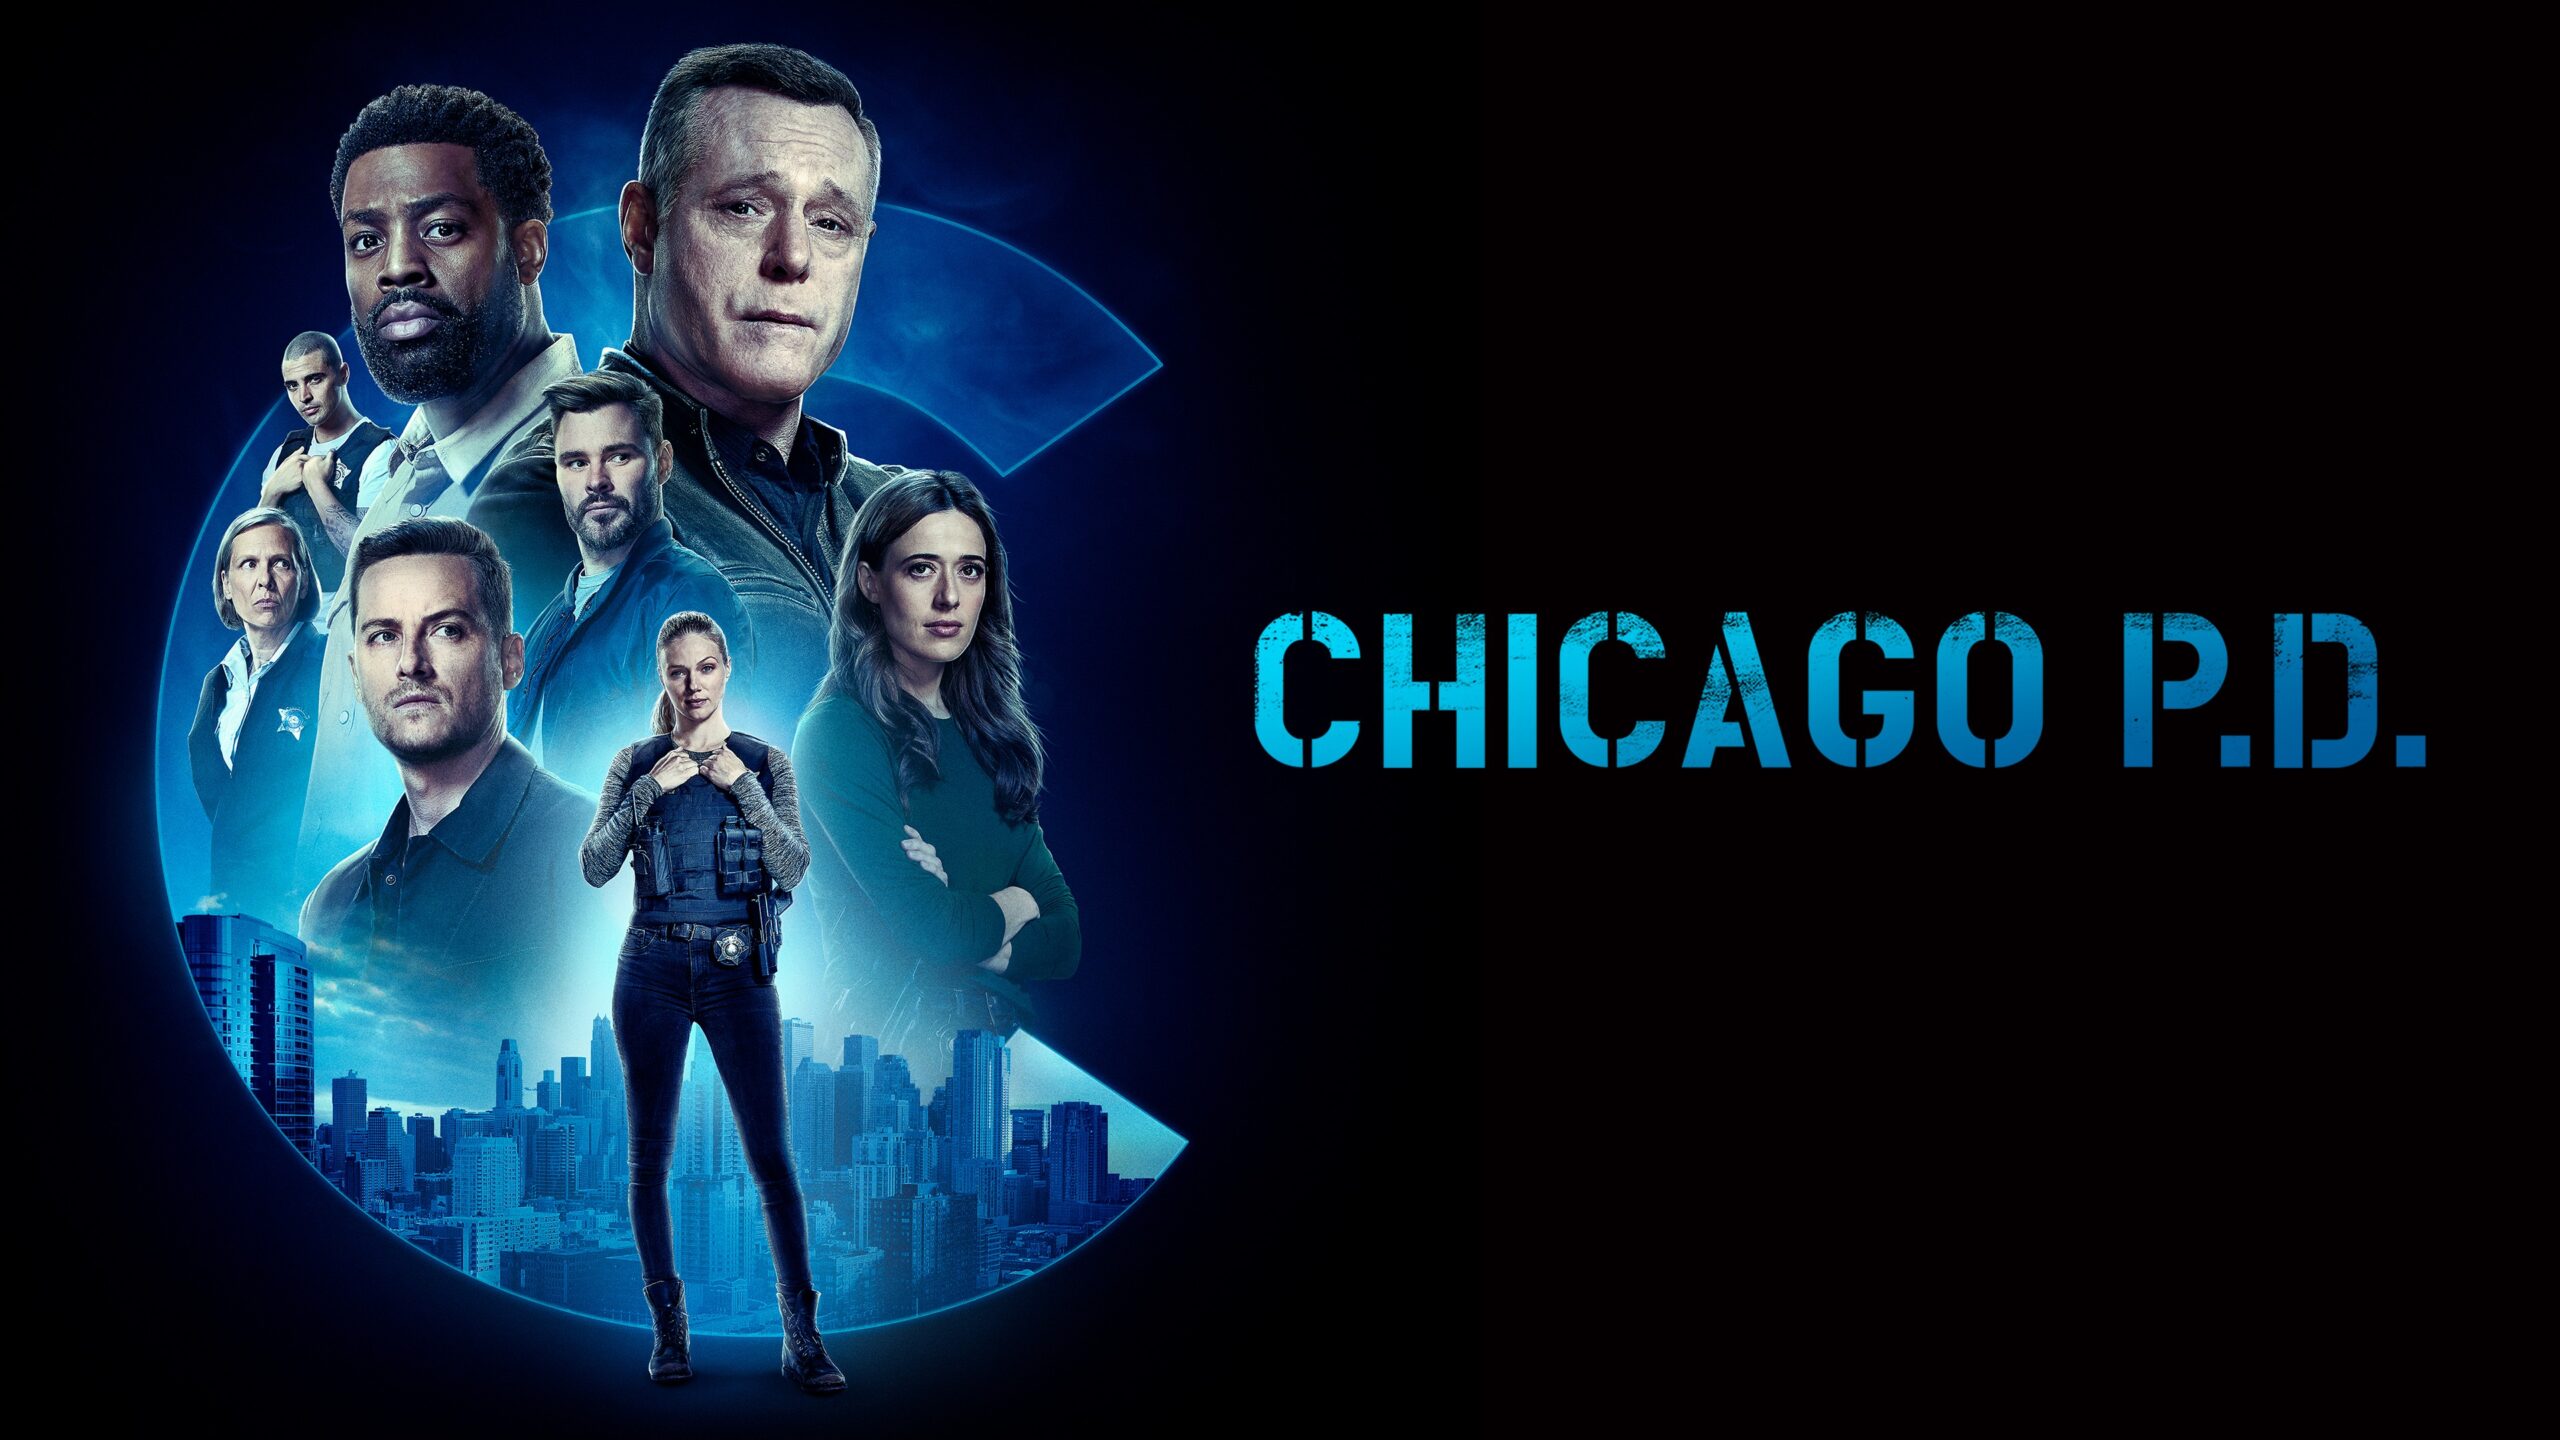 Brace Yourself for Blood, Lies, and a New Chief! Chicago PD Season 10